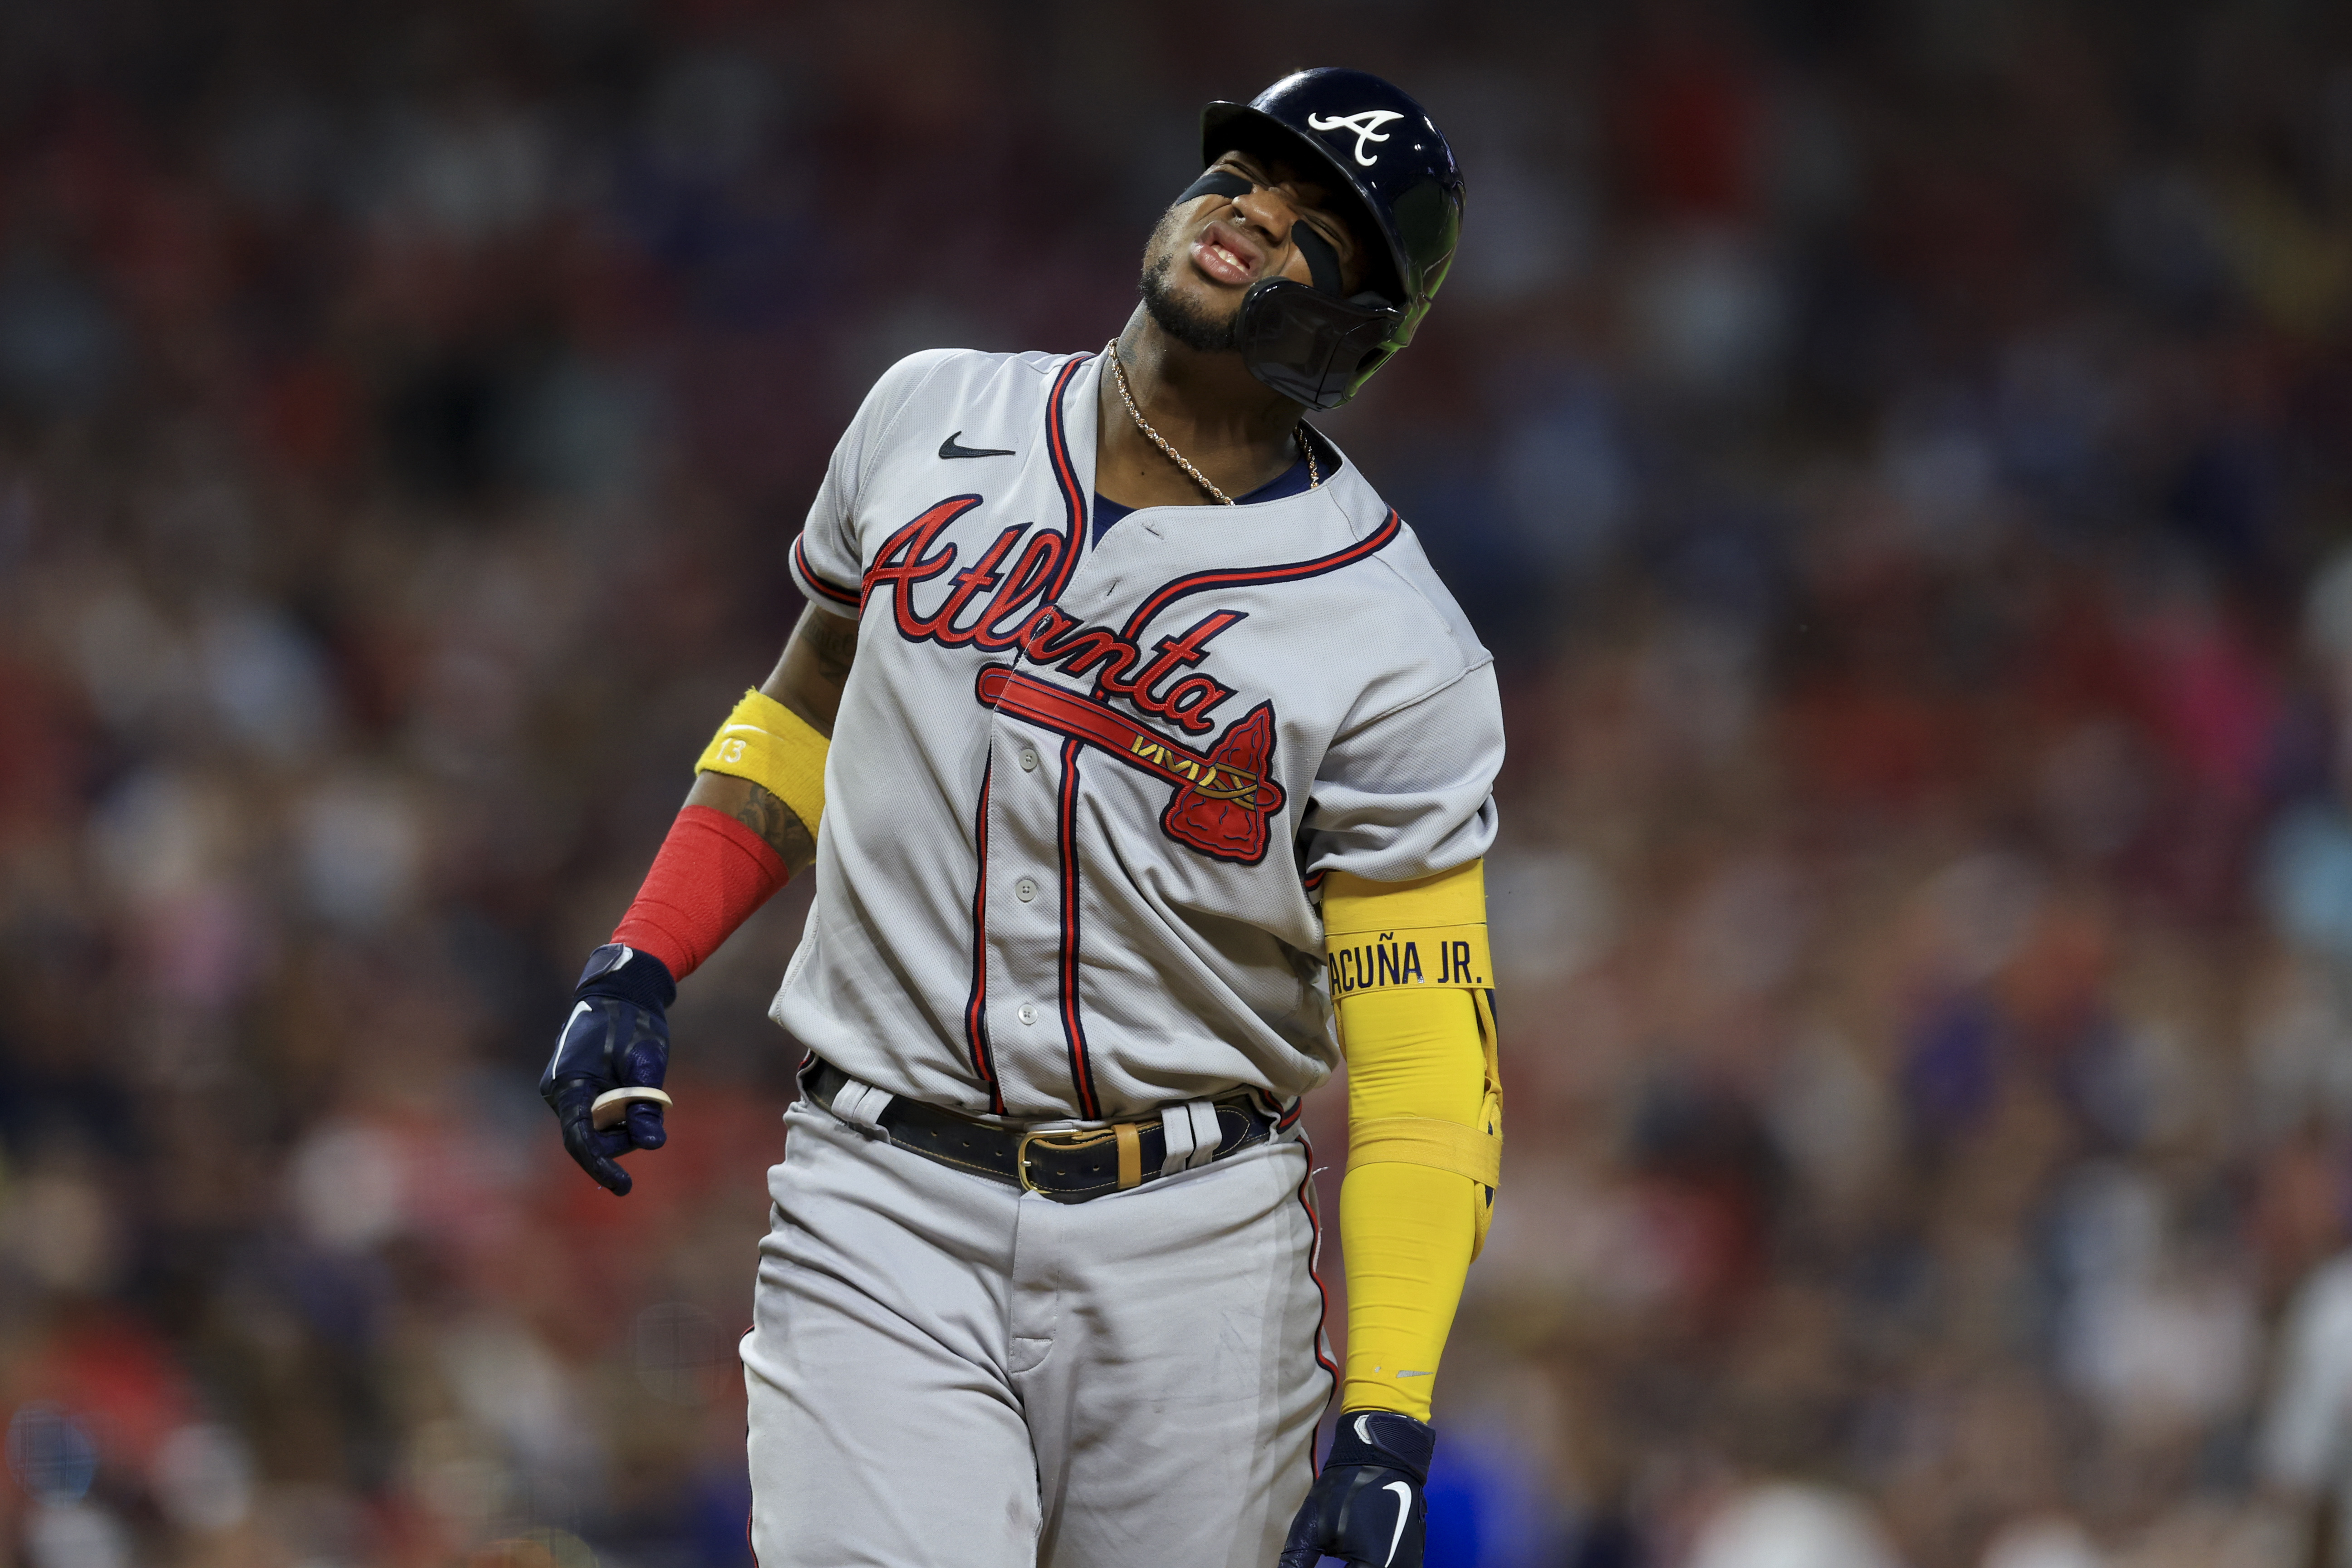 Braves Hitting Coach Gives Brutally Honest Review of Ronald Acuña Jr.'s Recent Play